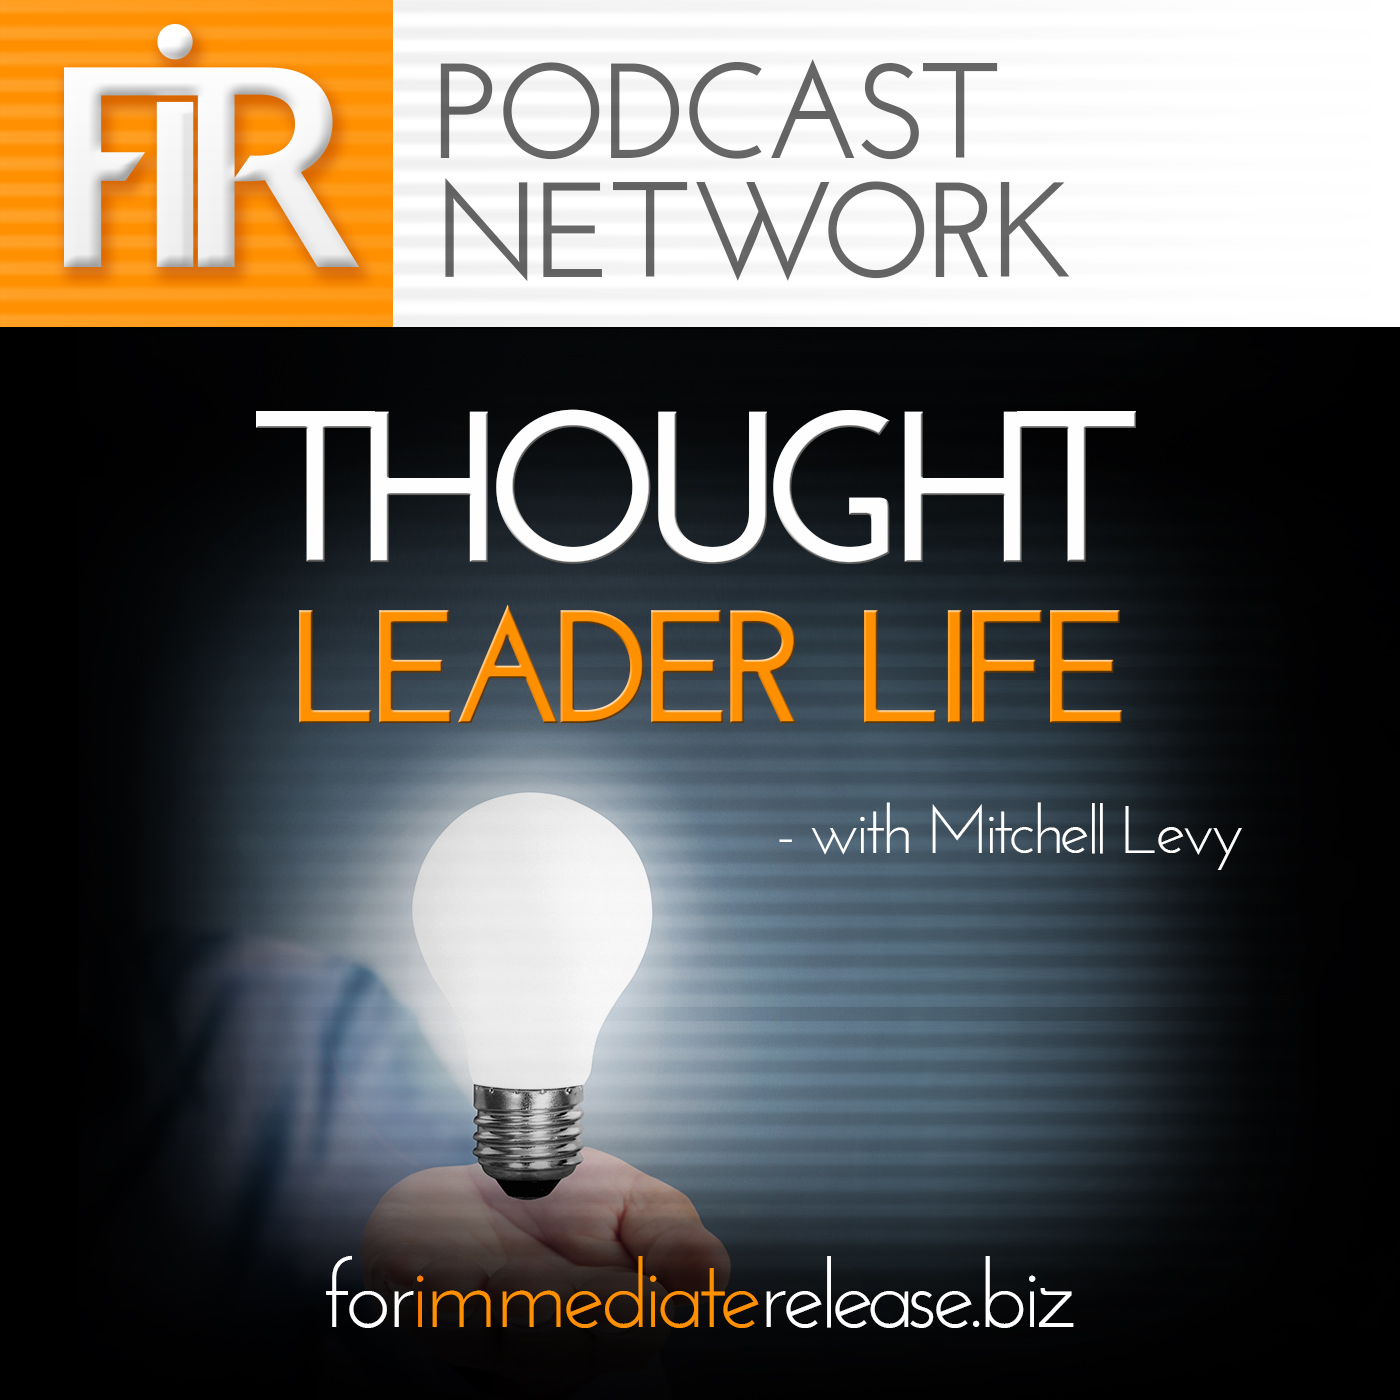 Thought Leader Life with Mitchell Levy